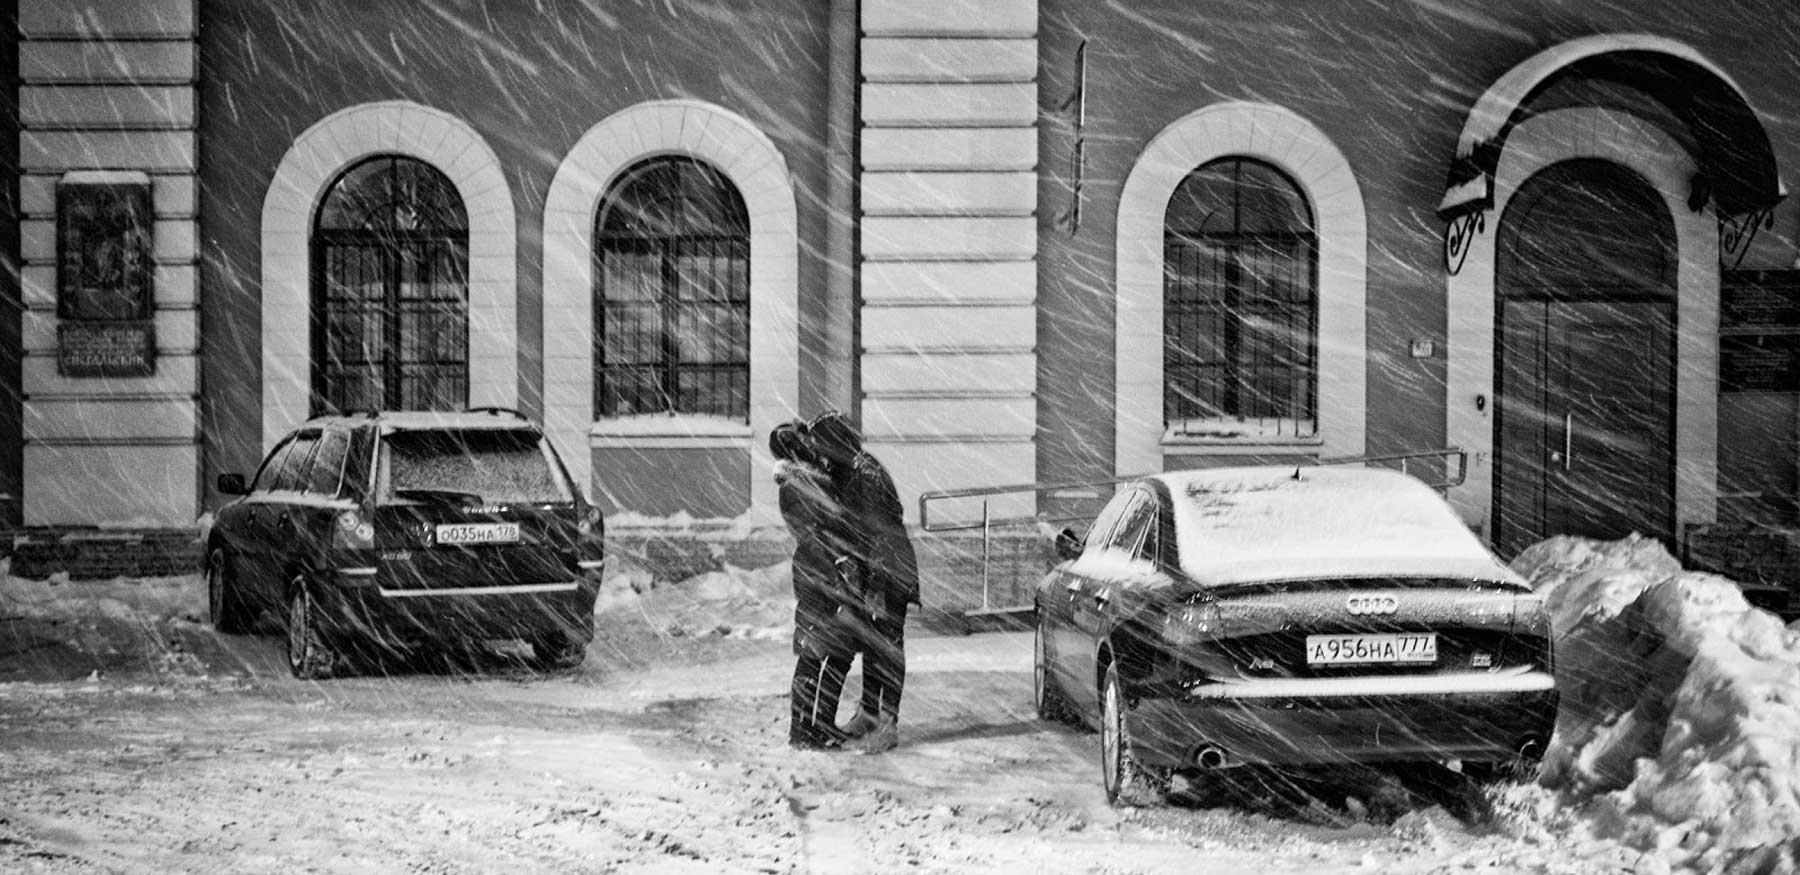 Three Rules of Street Photography in The Snow | ArtSocket Gallery Magazine